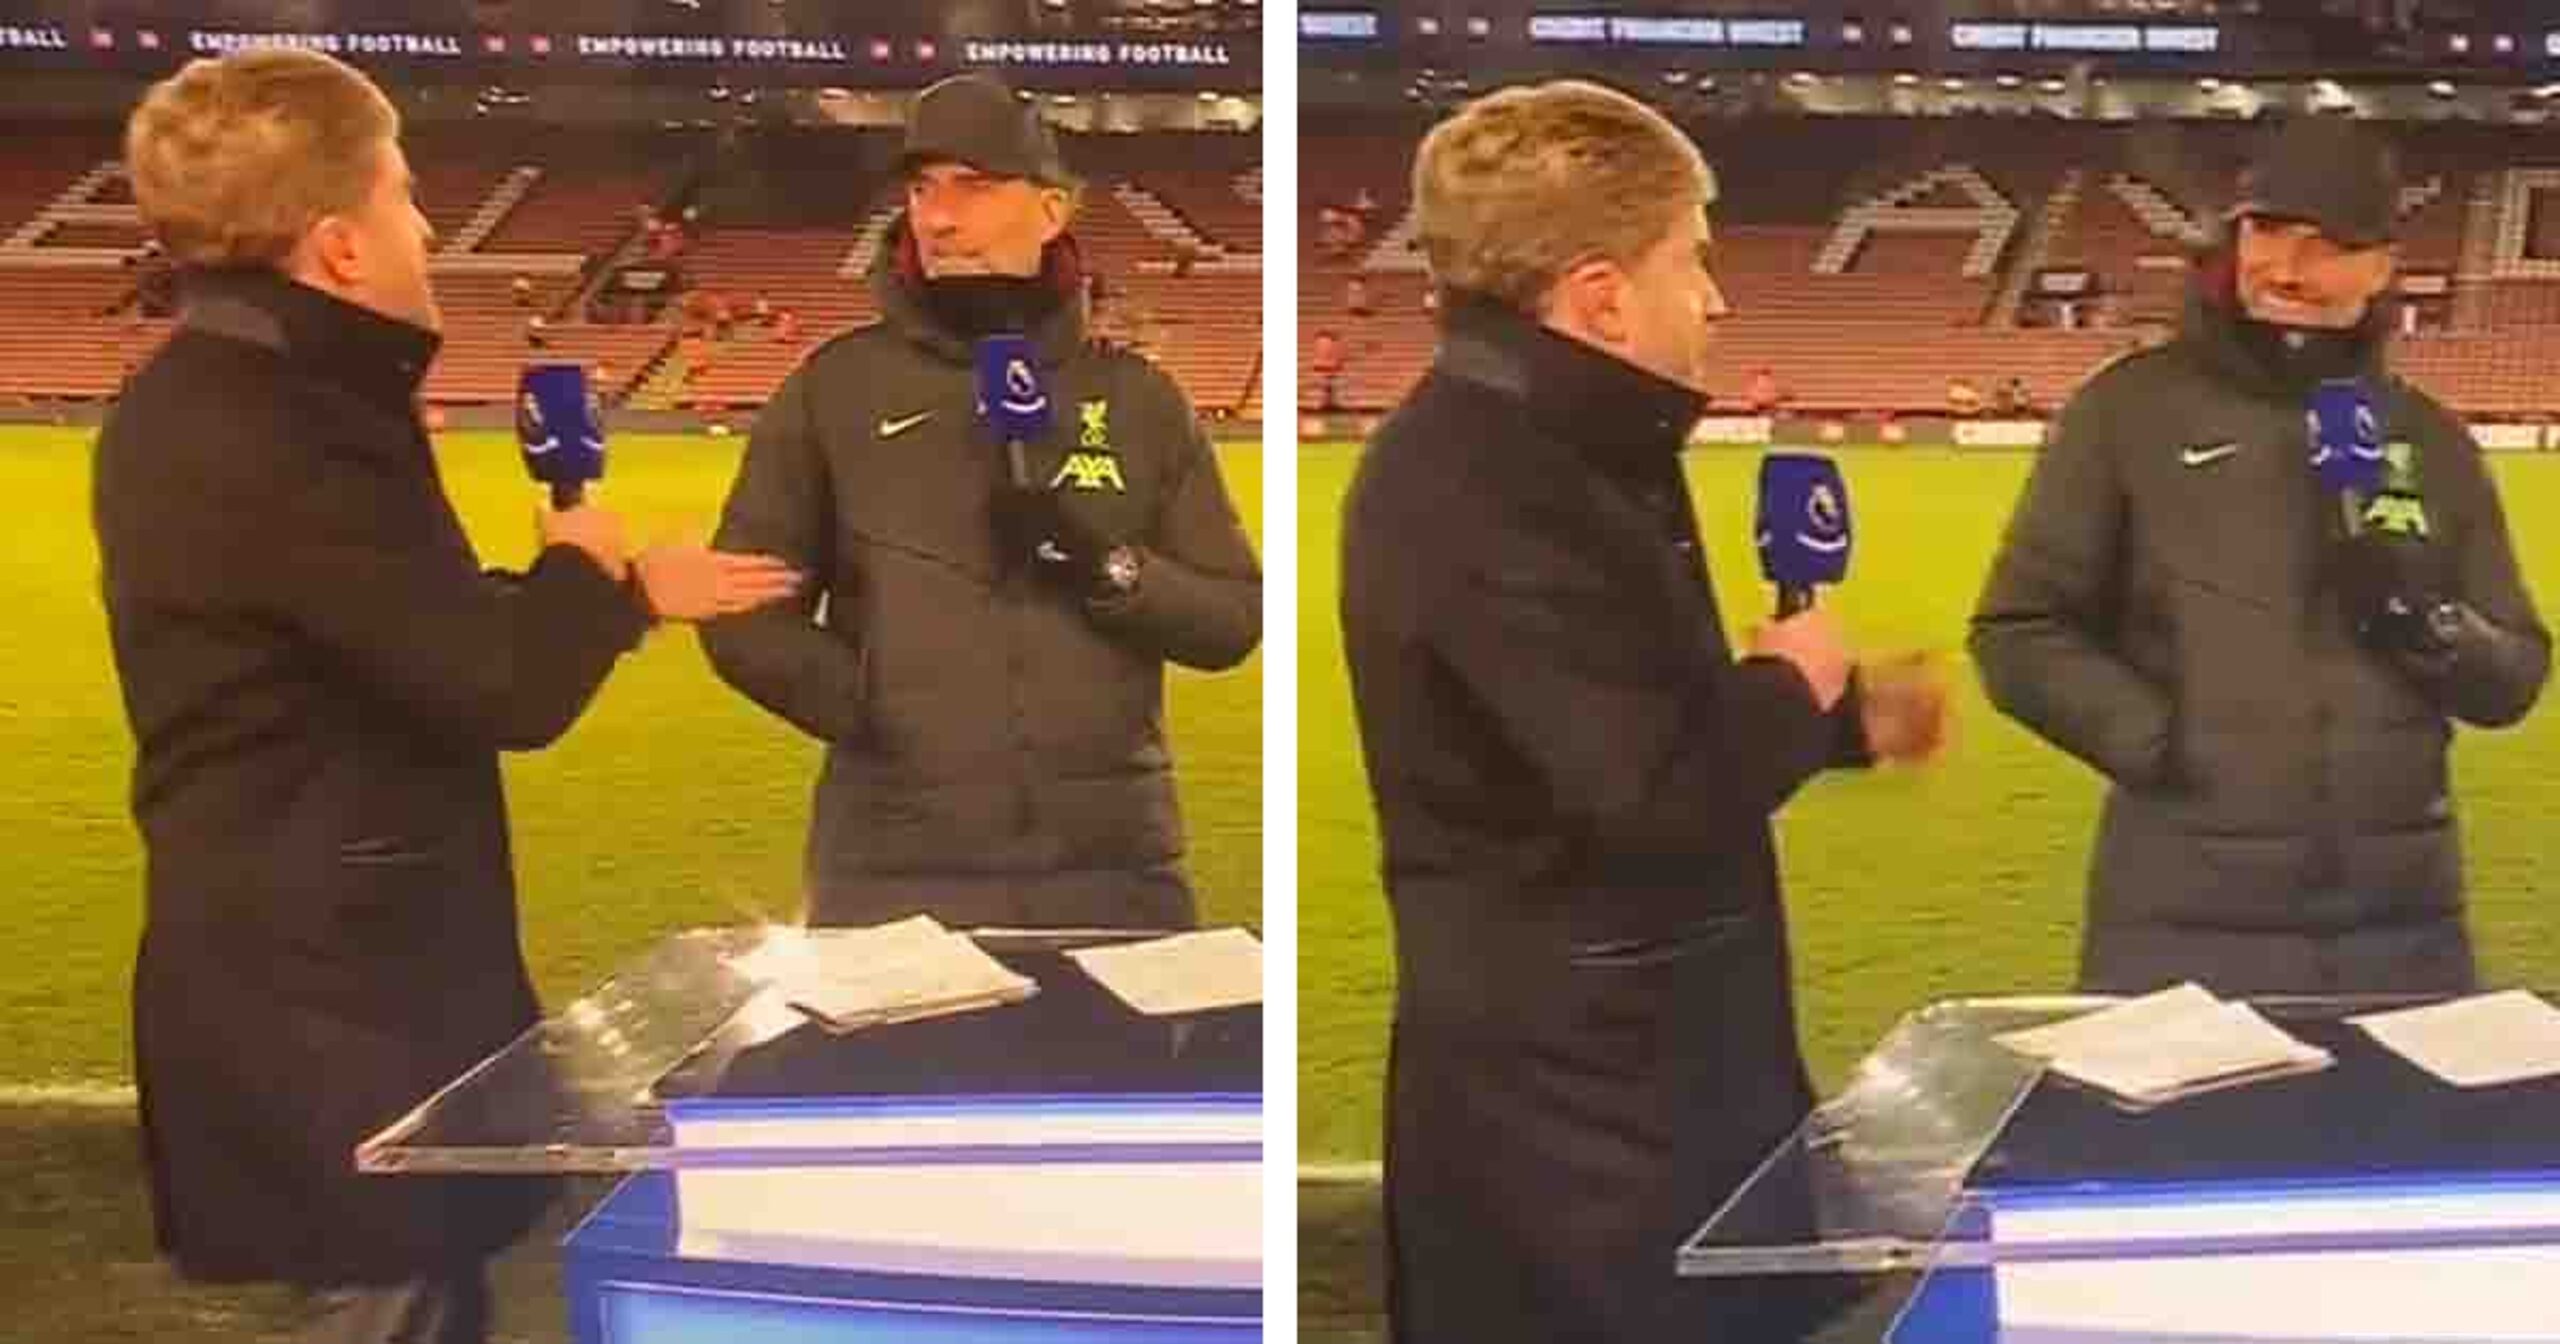 Look: Jurgen Klopp Makes Reporter Uneasy For Joking About Early Kickoffs